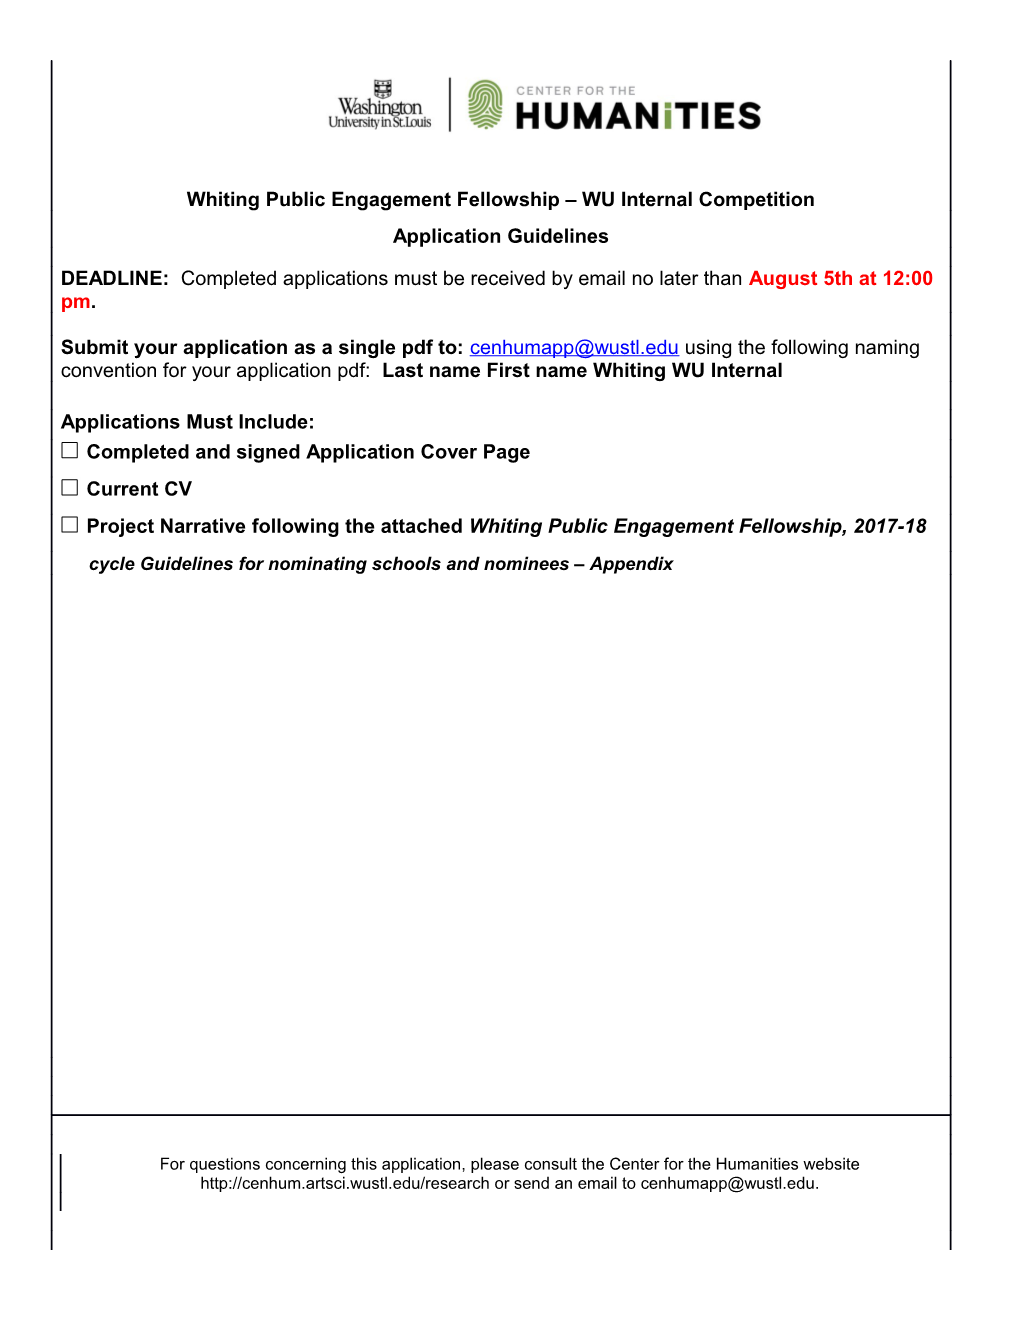 Whiting Public Engagement Fellowship, 2017-18 Cycle